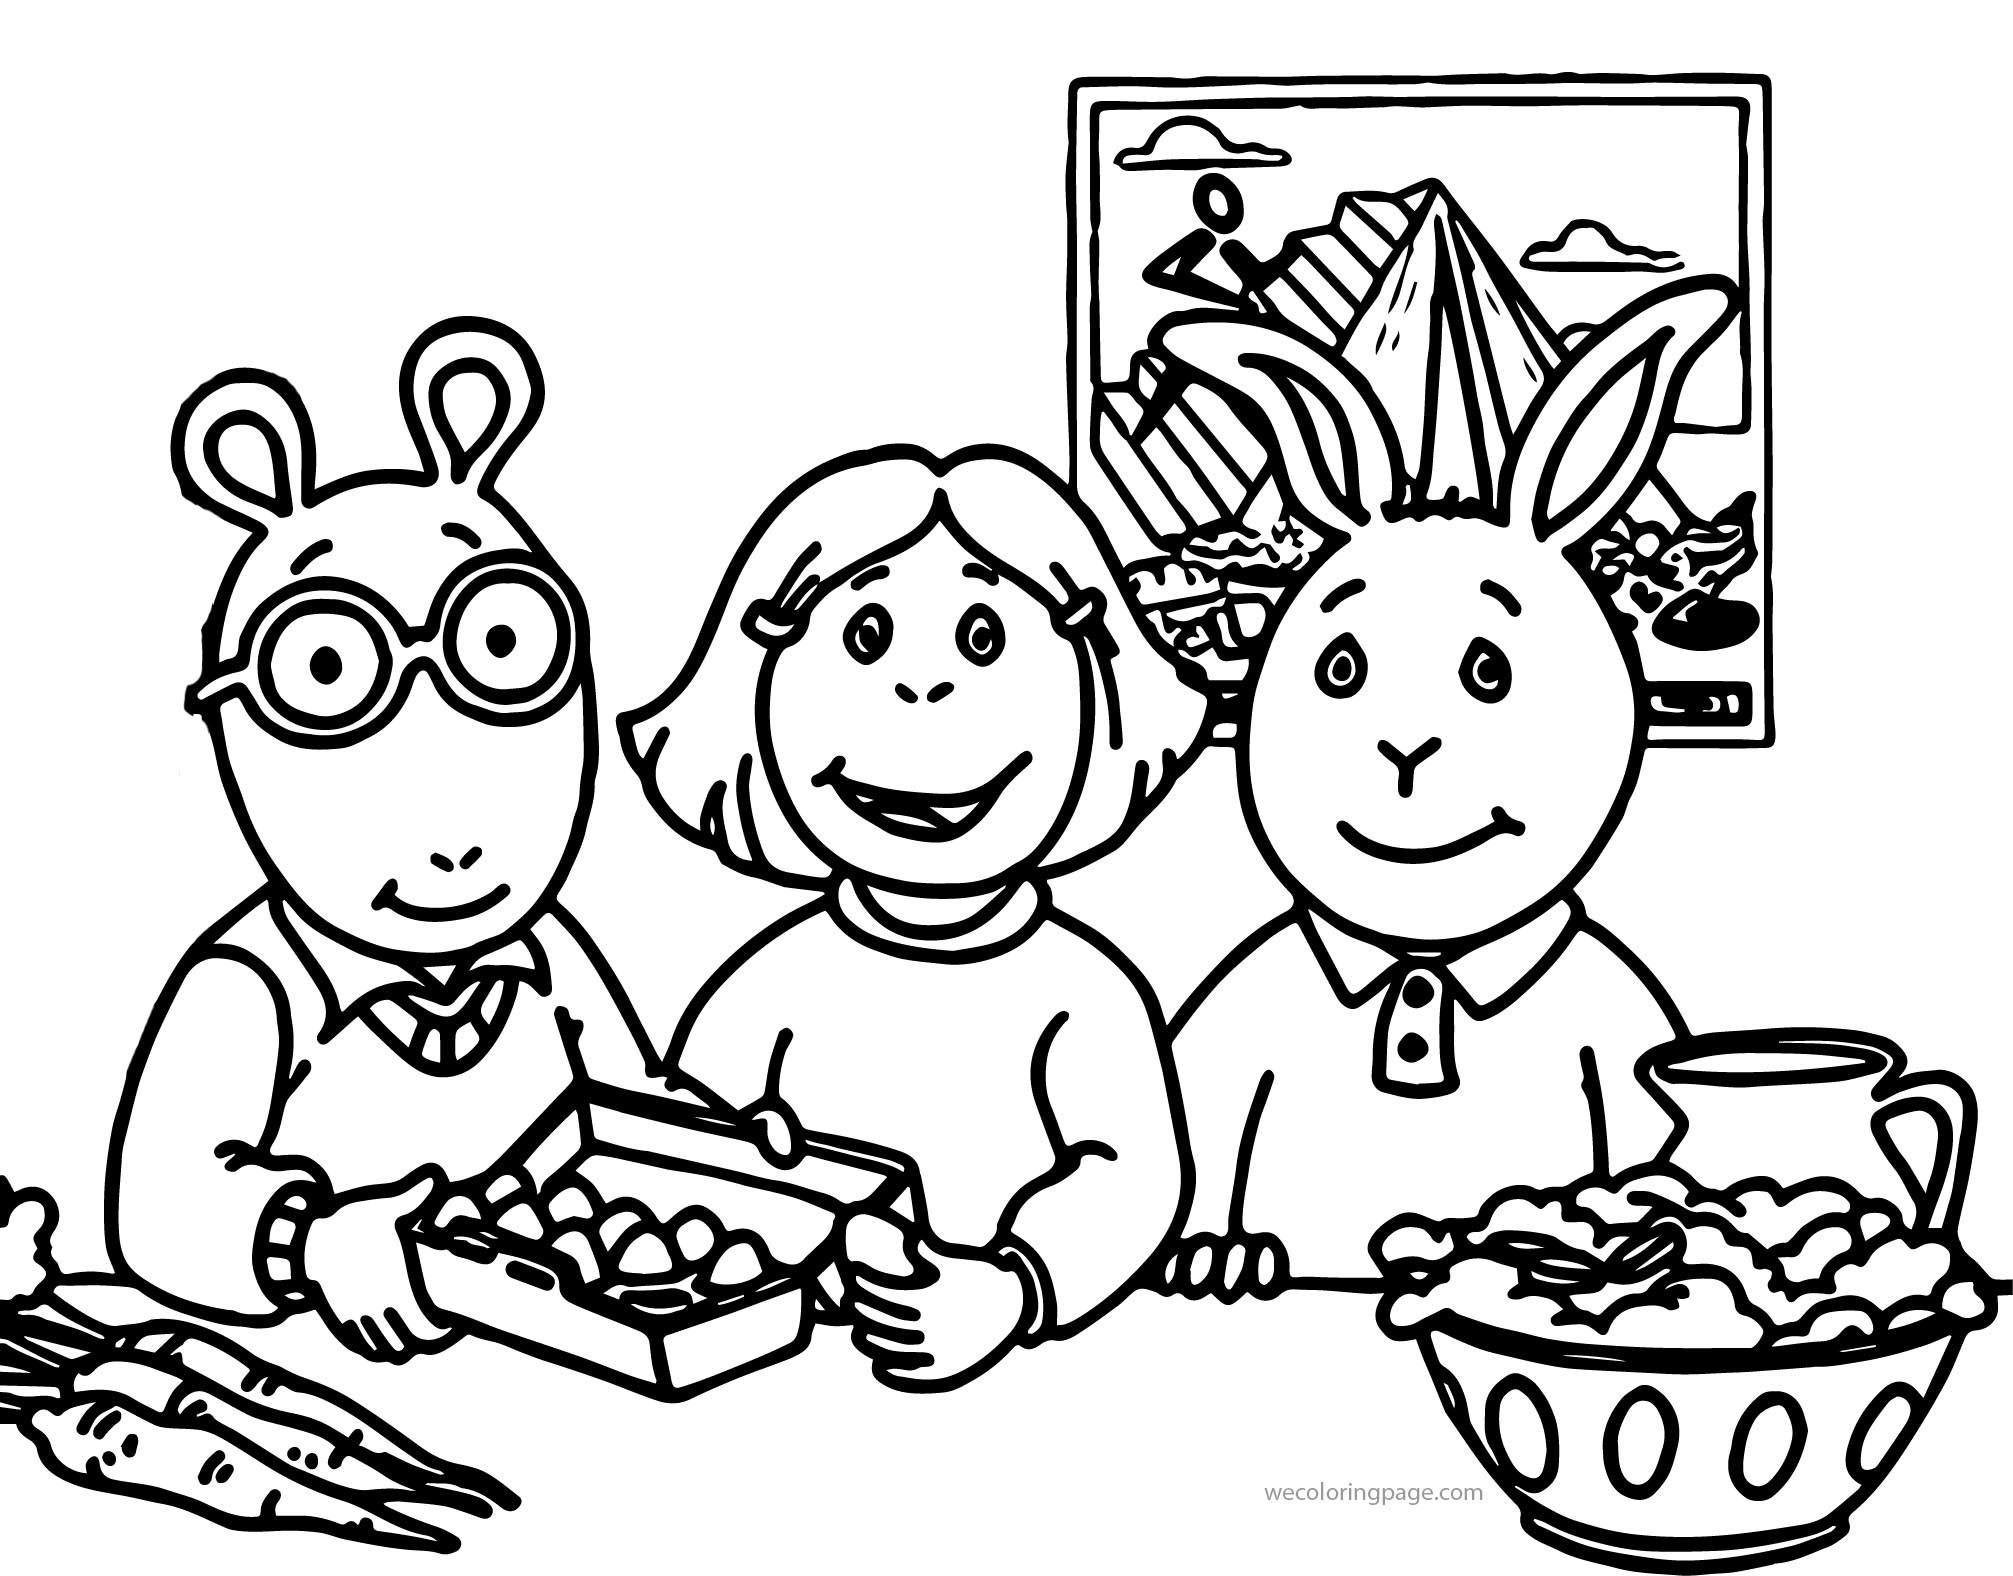 Pbs Kids Coloring Pages
 Pbs Kids Colouring Pages Sketch Coloring Page